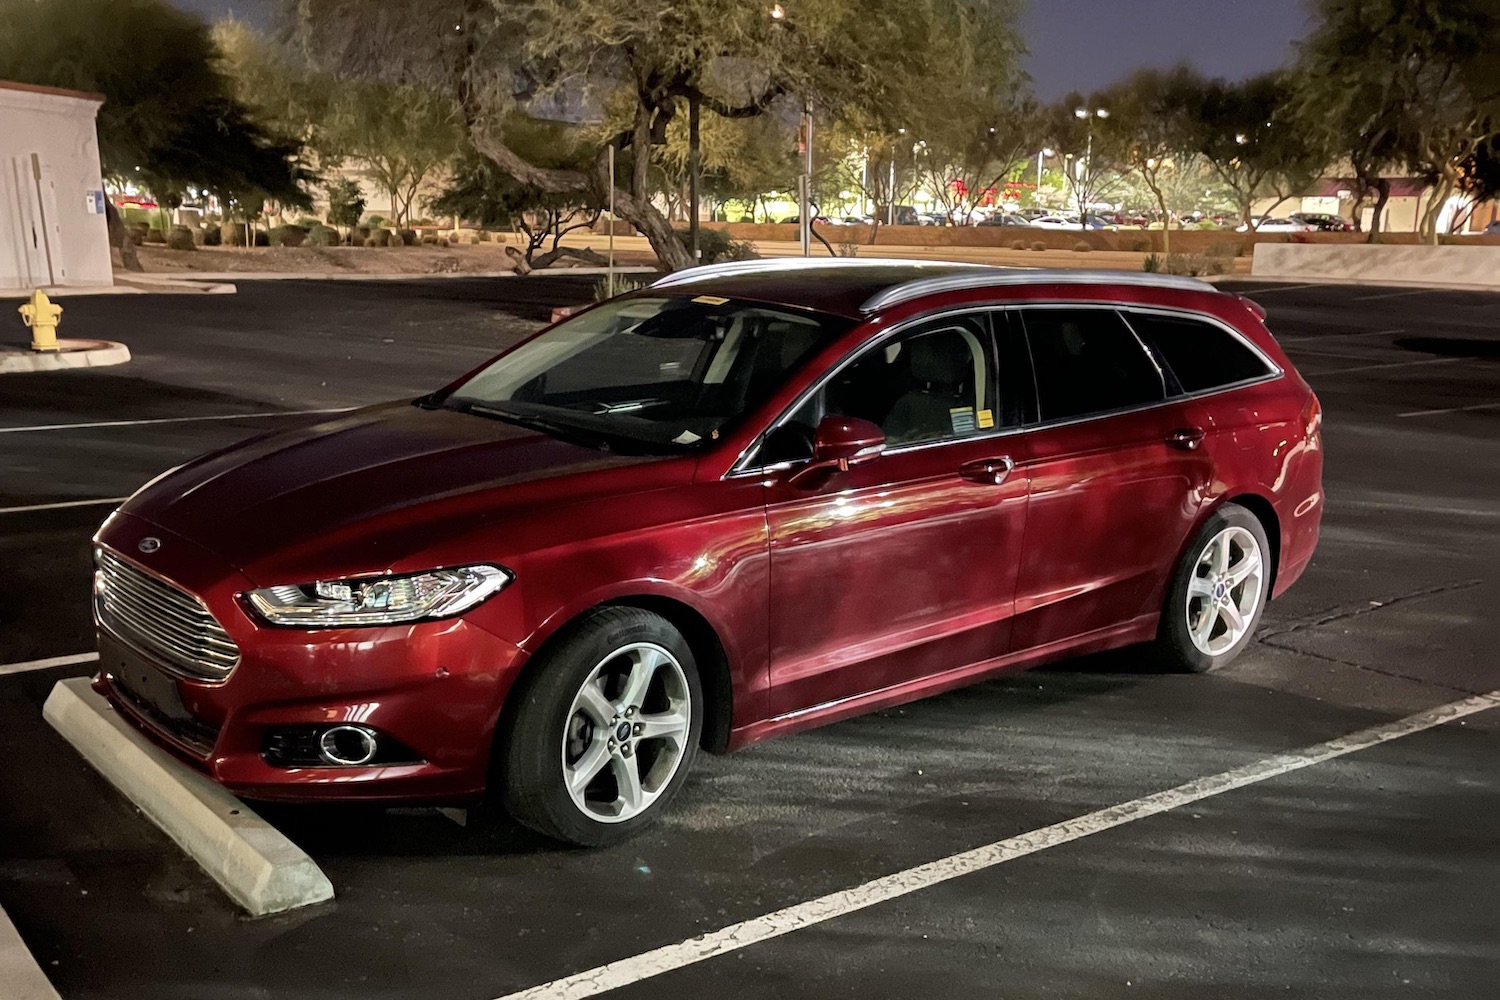 New Ford Mondeo Arrives At The Dealer In China